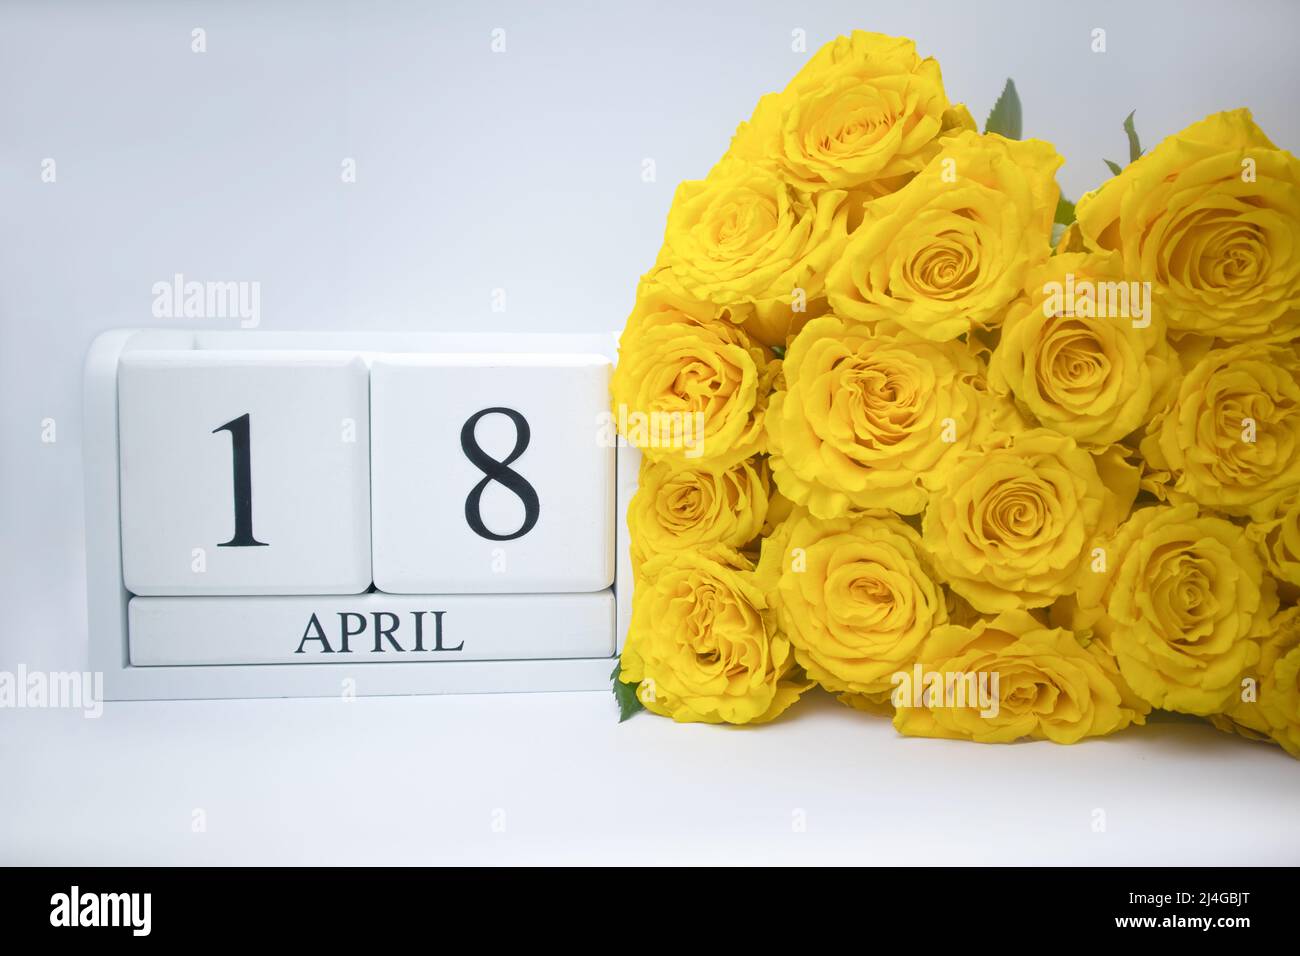 April 18 on a white, wooden calendar, next to a bouquet of yellow roses. Stock Photo